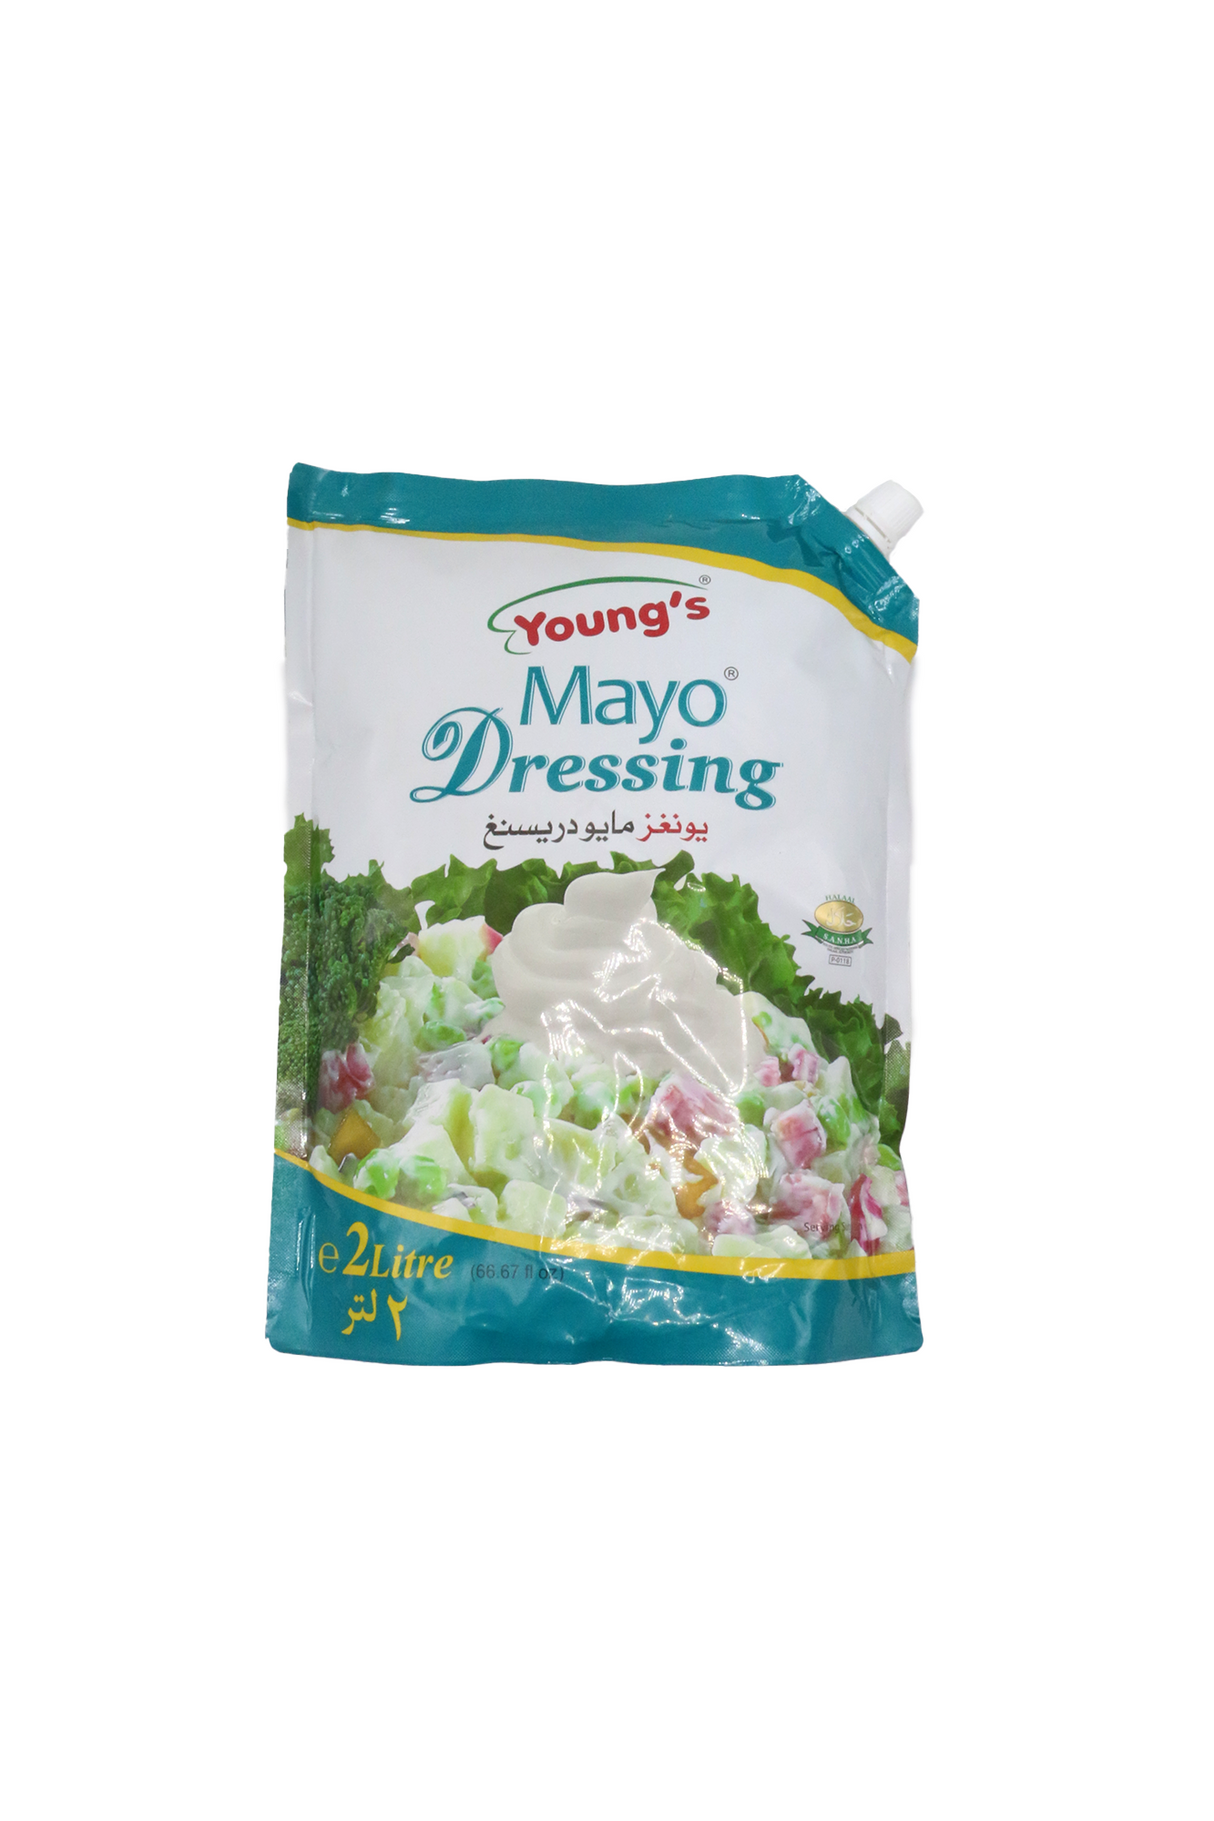 youngs mayo dressing 2l